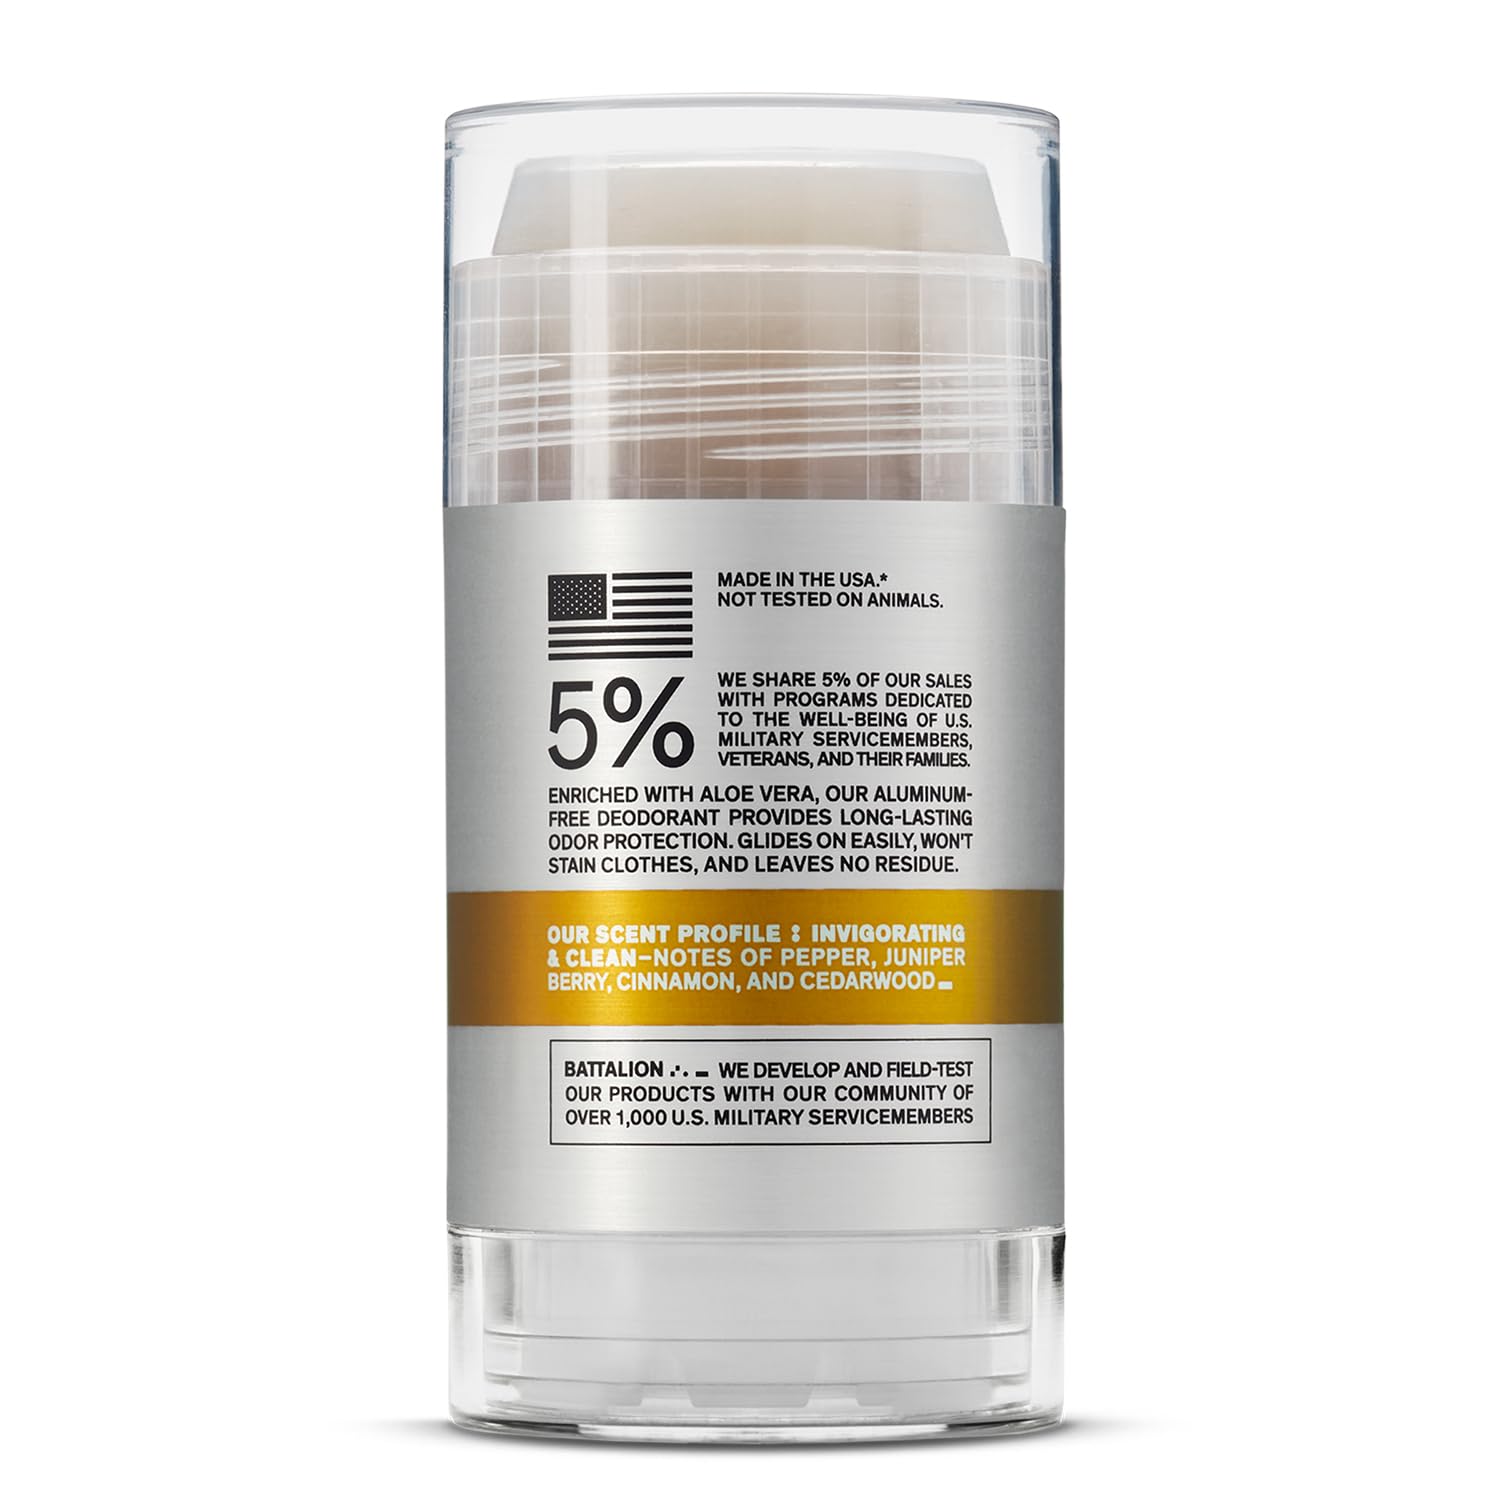 Aluminum-Free Natural Deodorant for Men by Bravo Sierra - Long Lasting All-Day Odor and Sweat Protection - Citrus and Cedarwood, 3.2 oz - Paraben-Free, Baking Soda Free, Vegan and Cruelty Free - Will Not Stain Clothes.